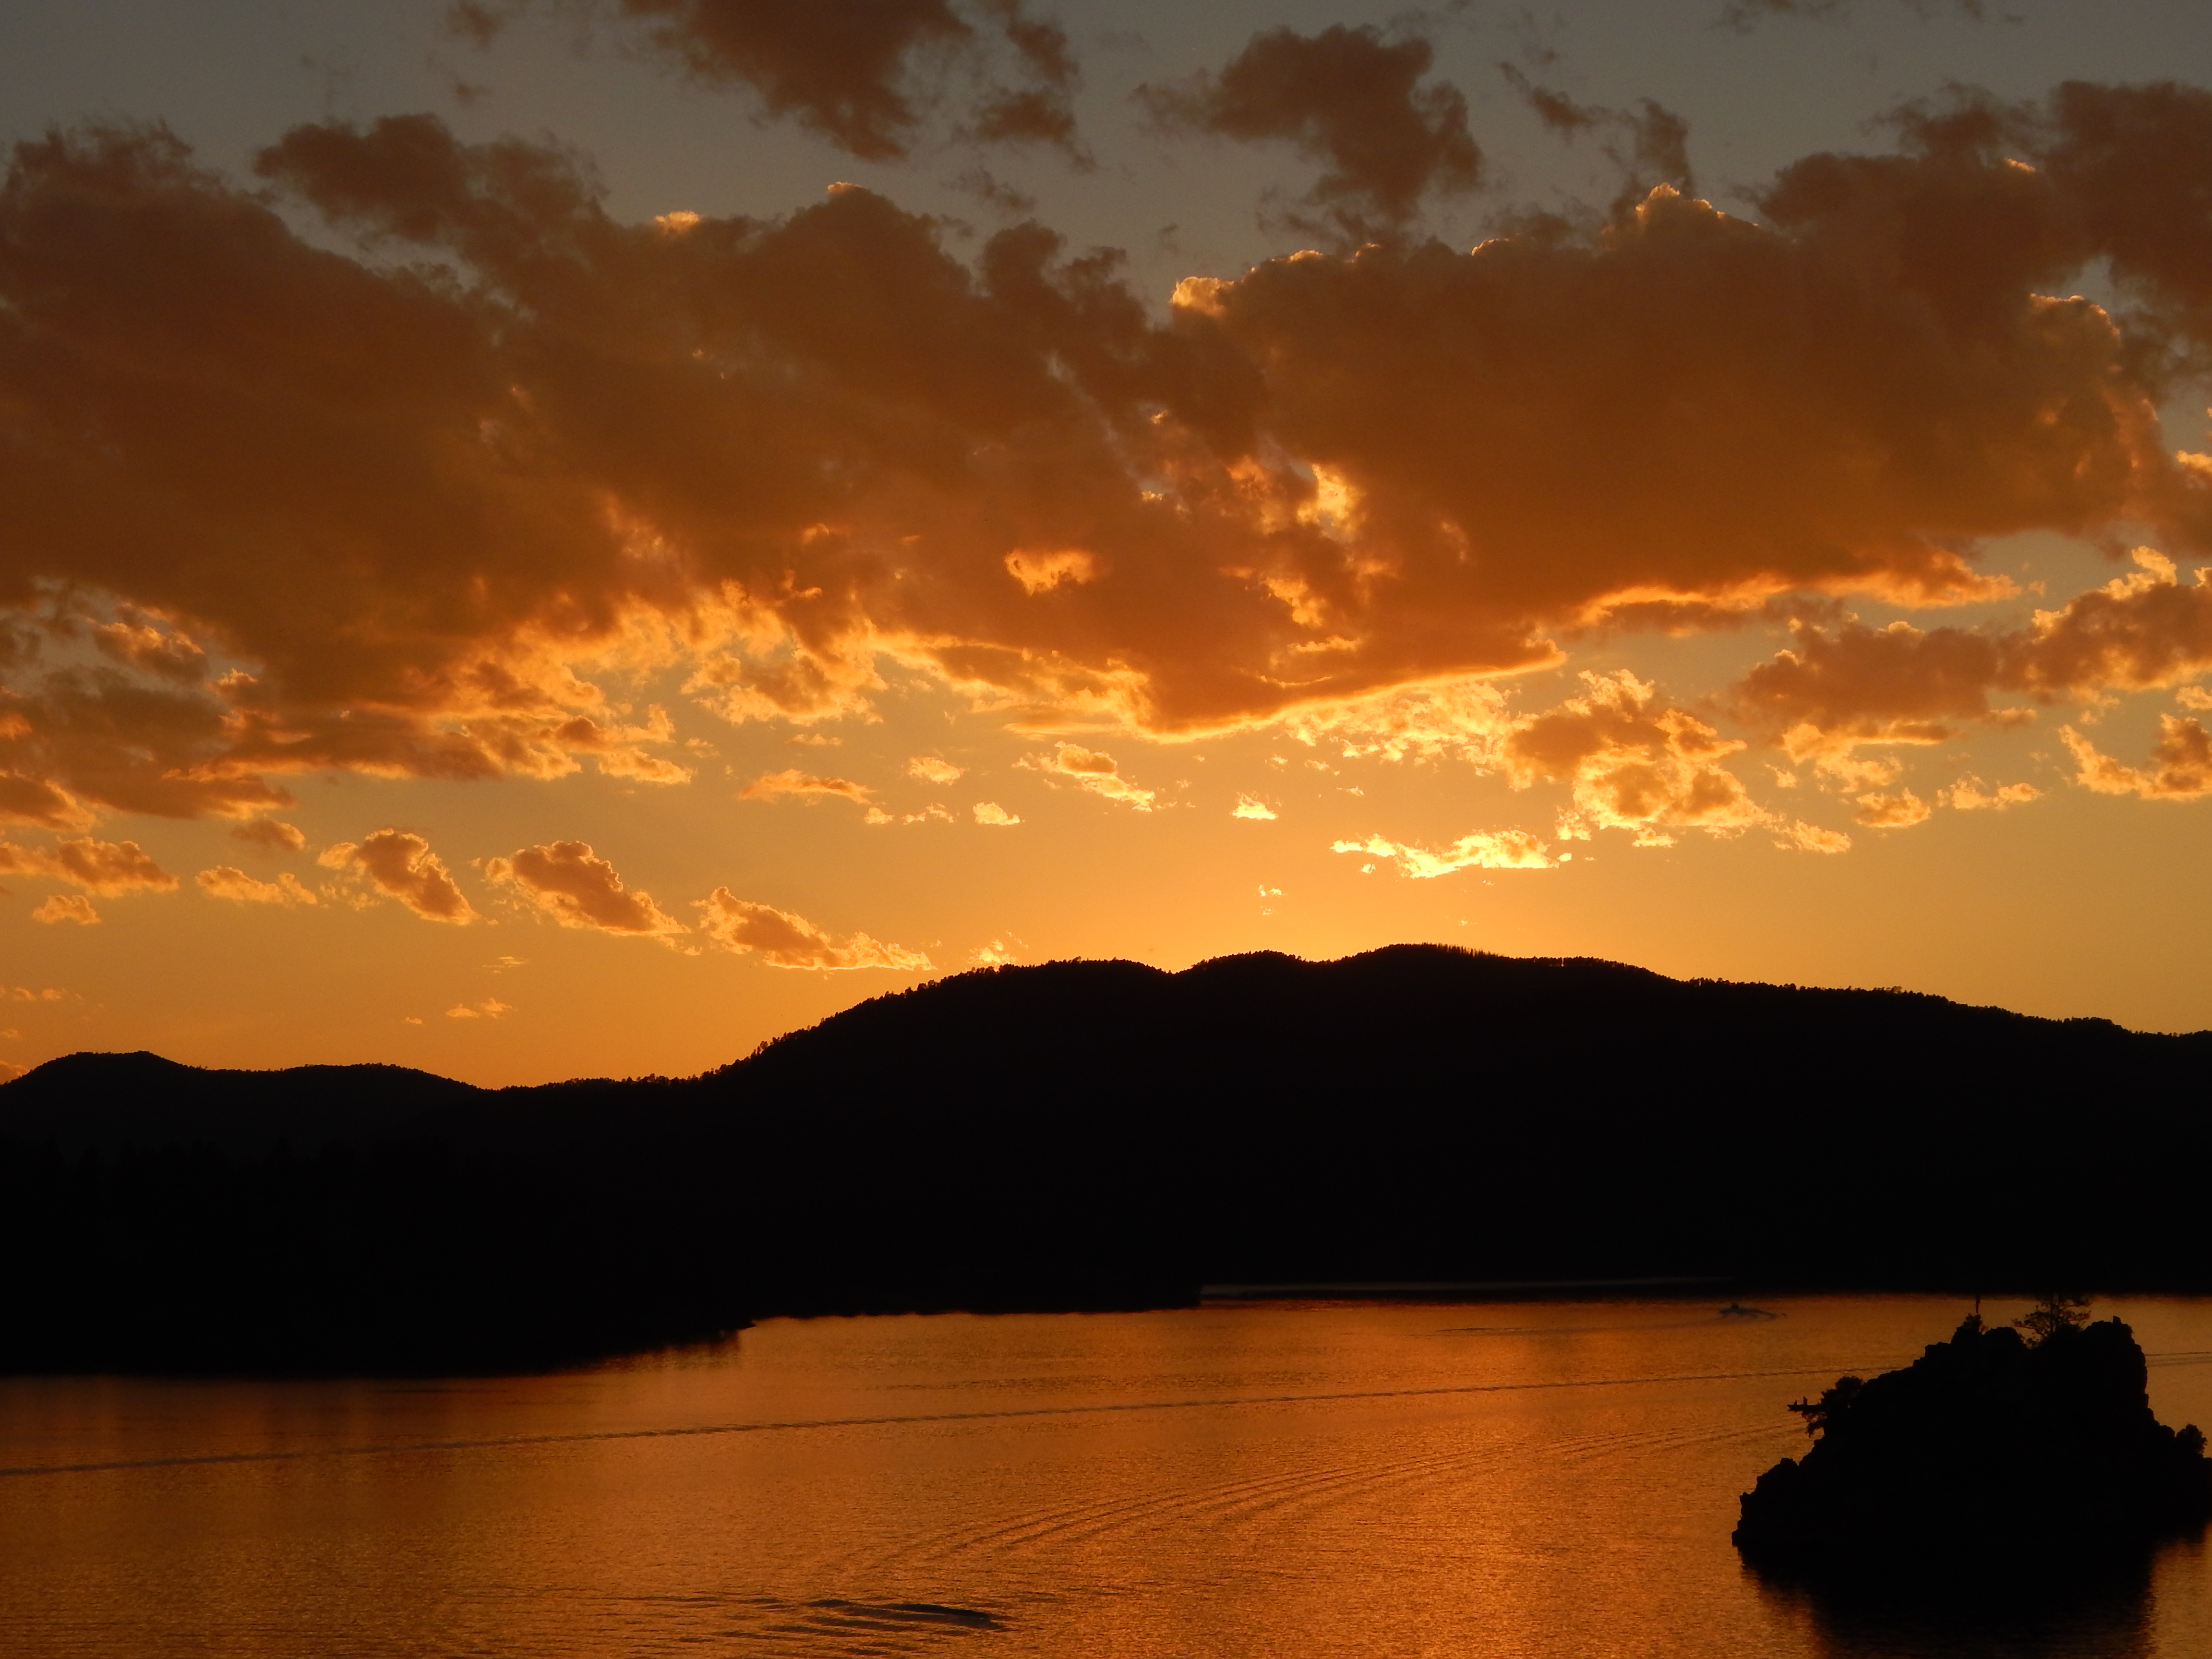 Pactola sunset looking west from the visitor's center July 2014.